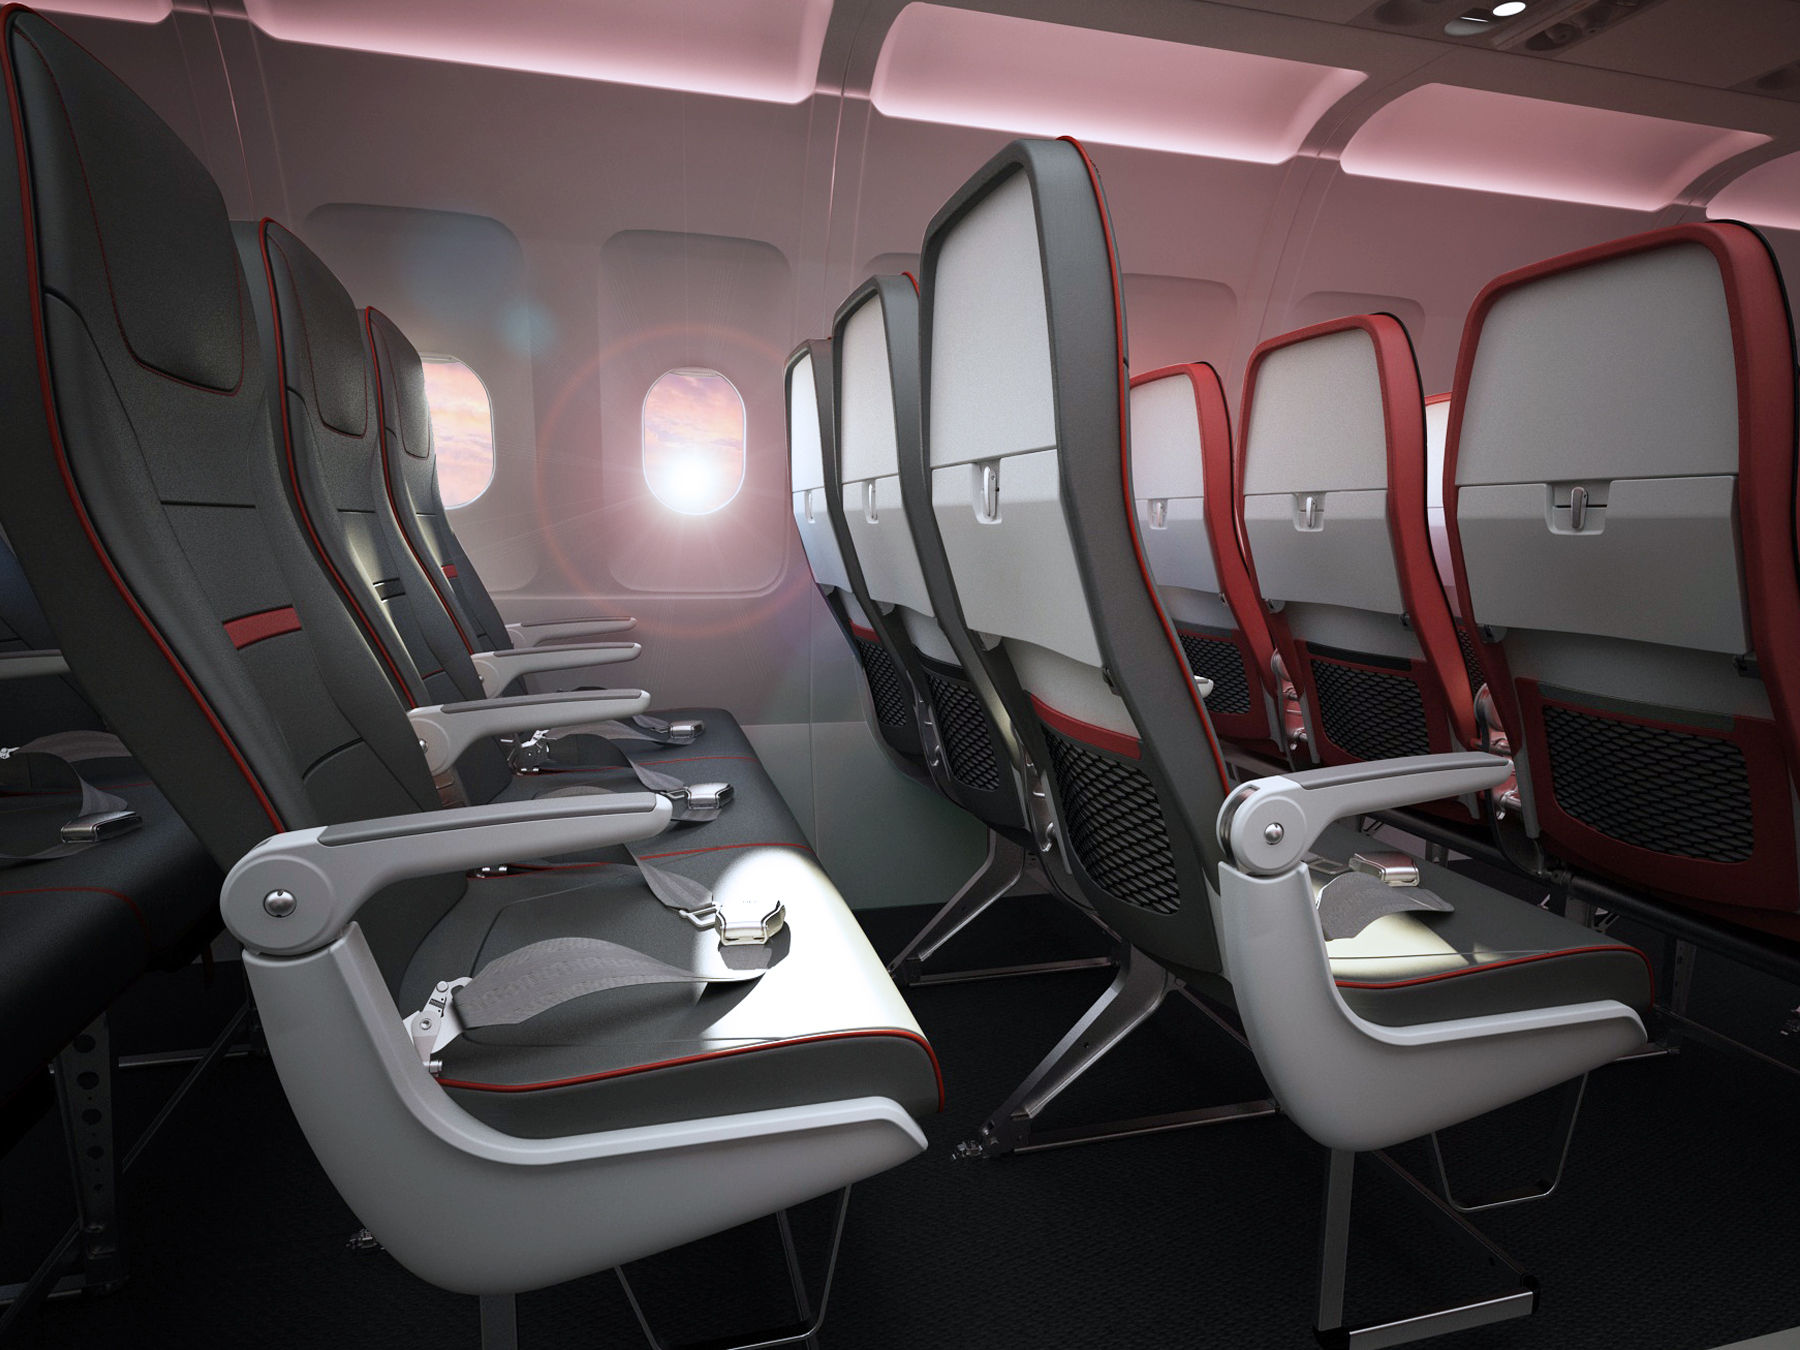 MYAirline partners up with Geven for sustainable A320 aircraft seating